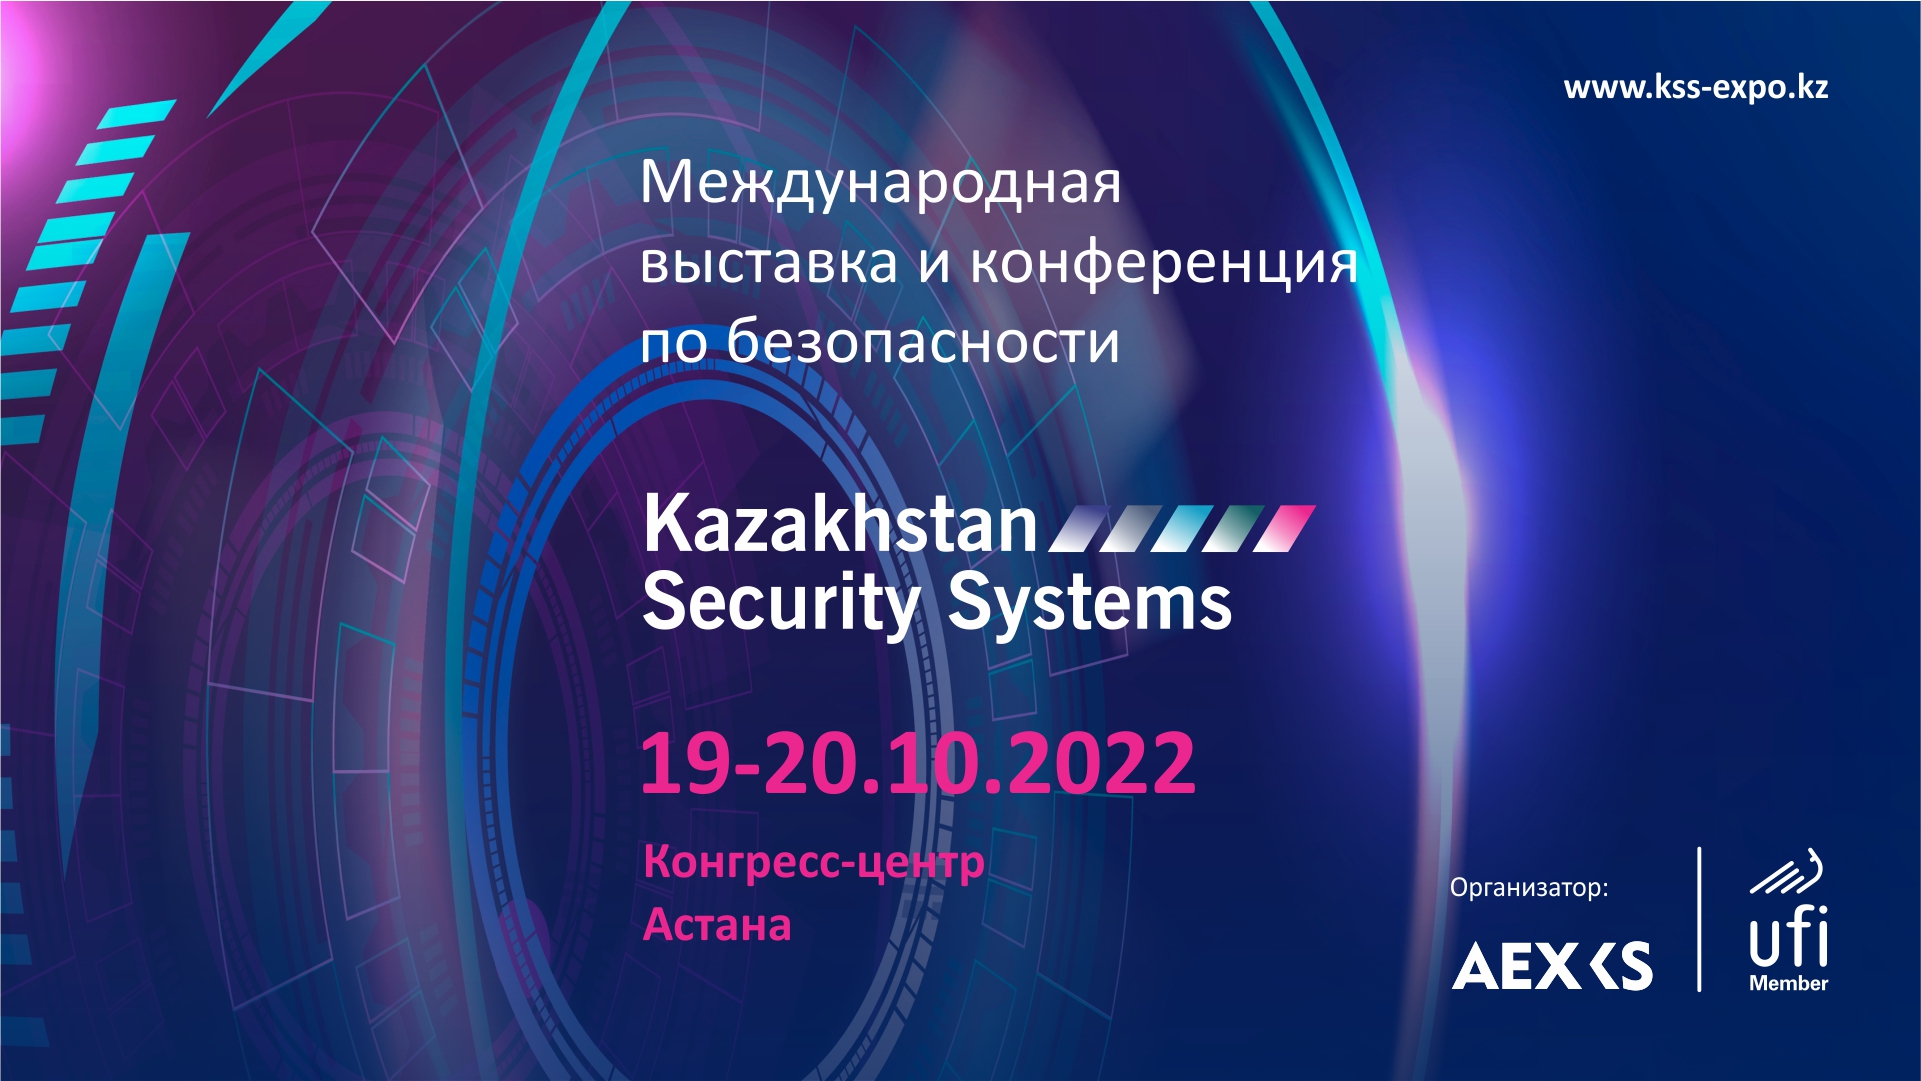 VIII International Exhibition and Conference on Kazakhstan Security Systems will be held at the Congress Center